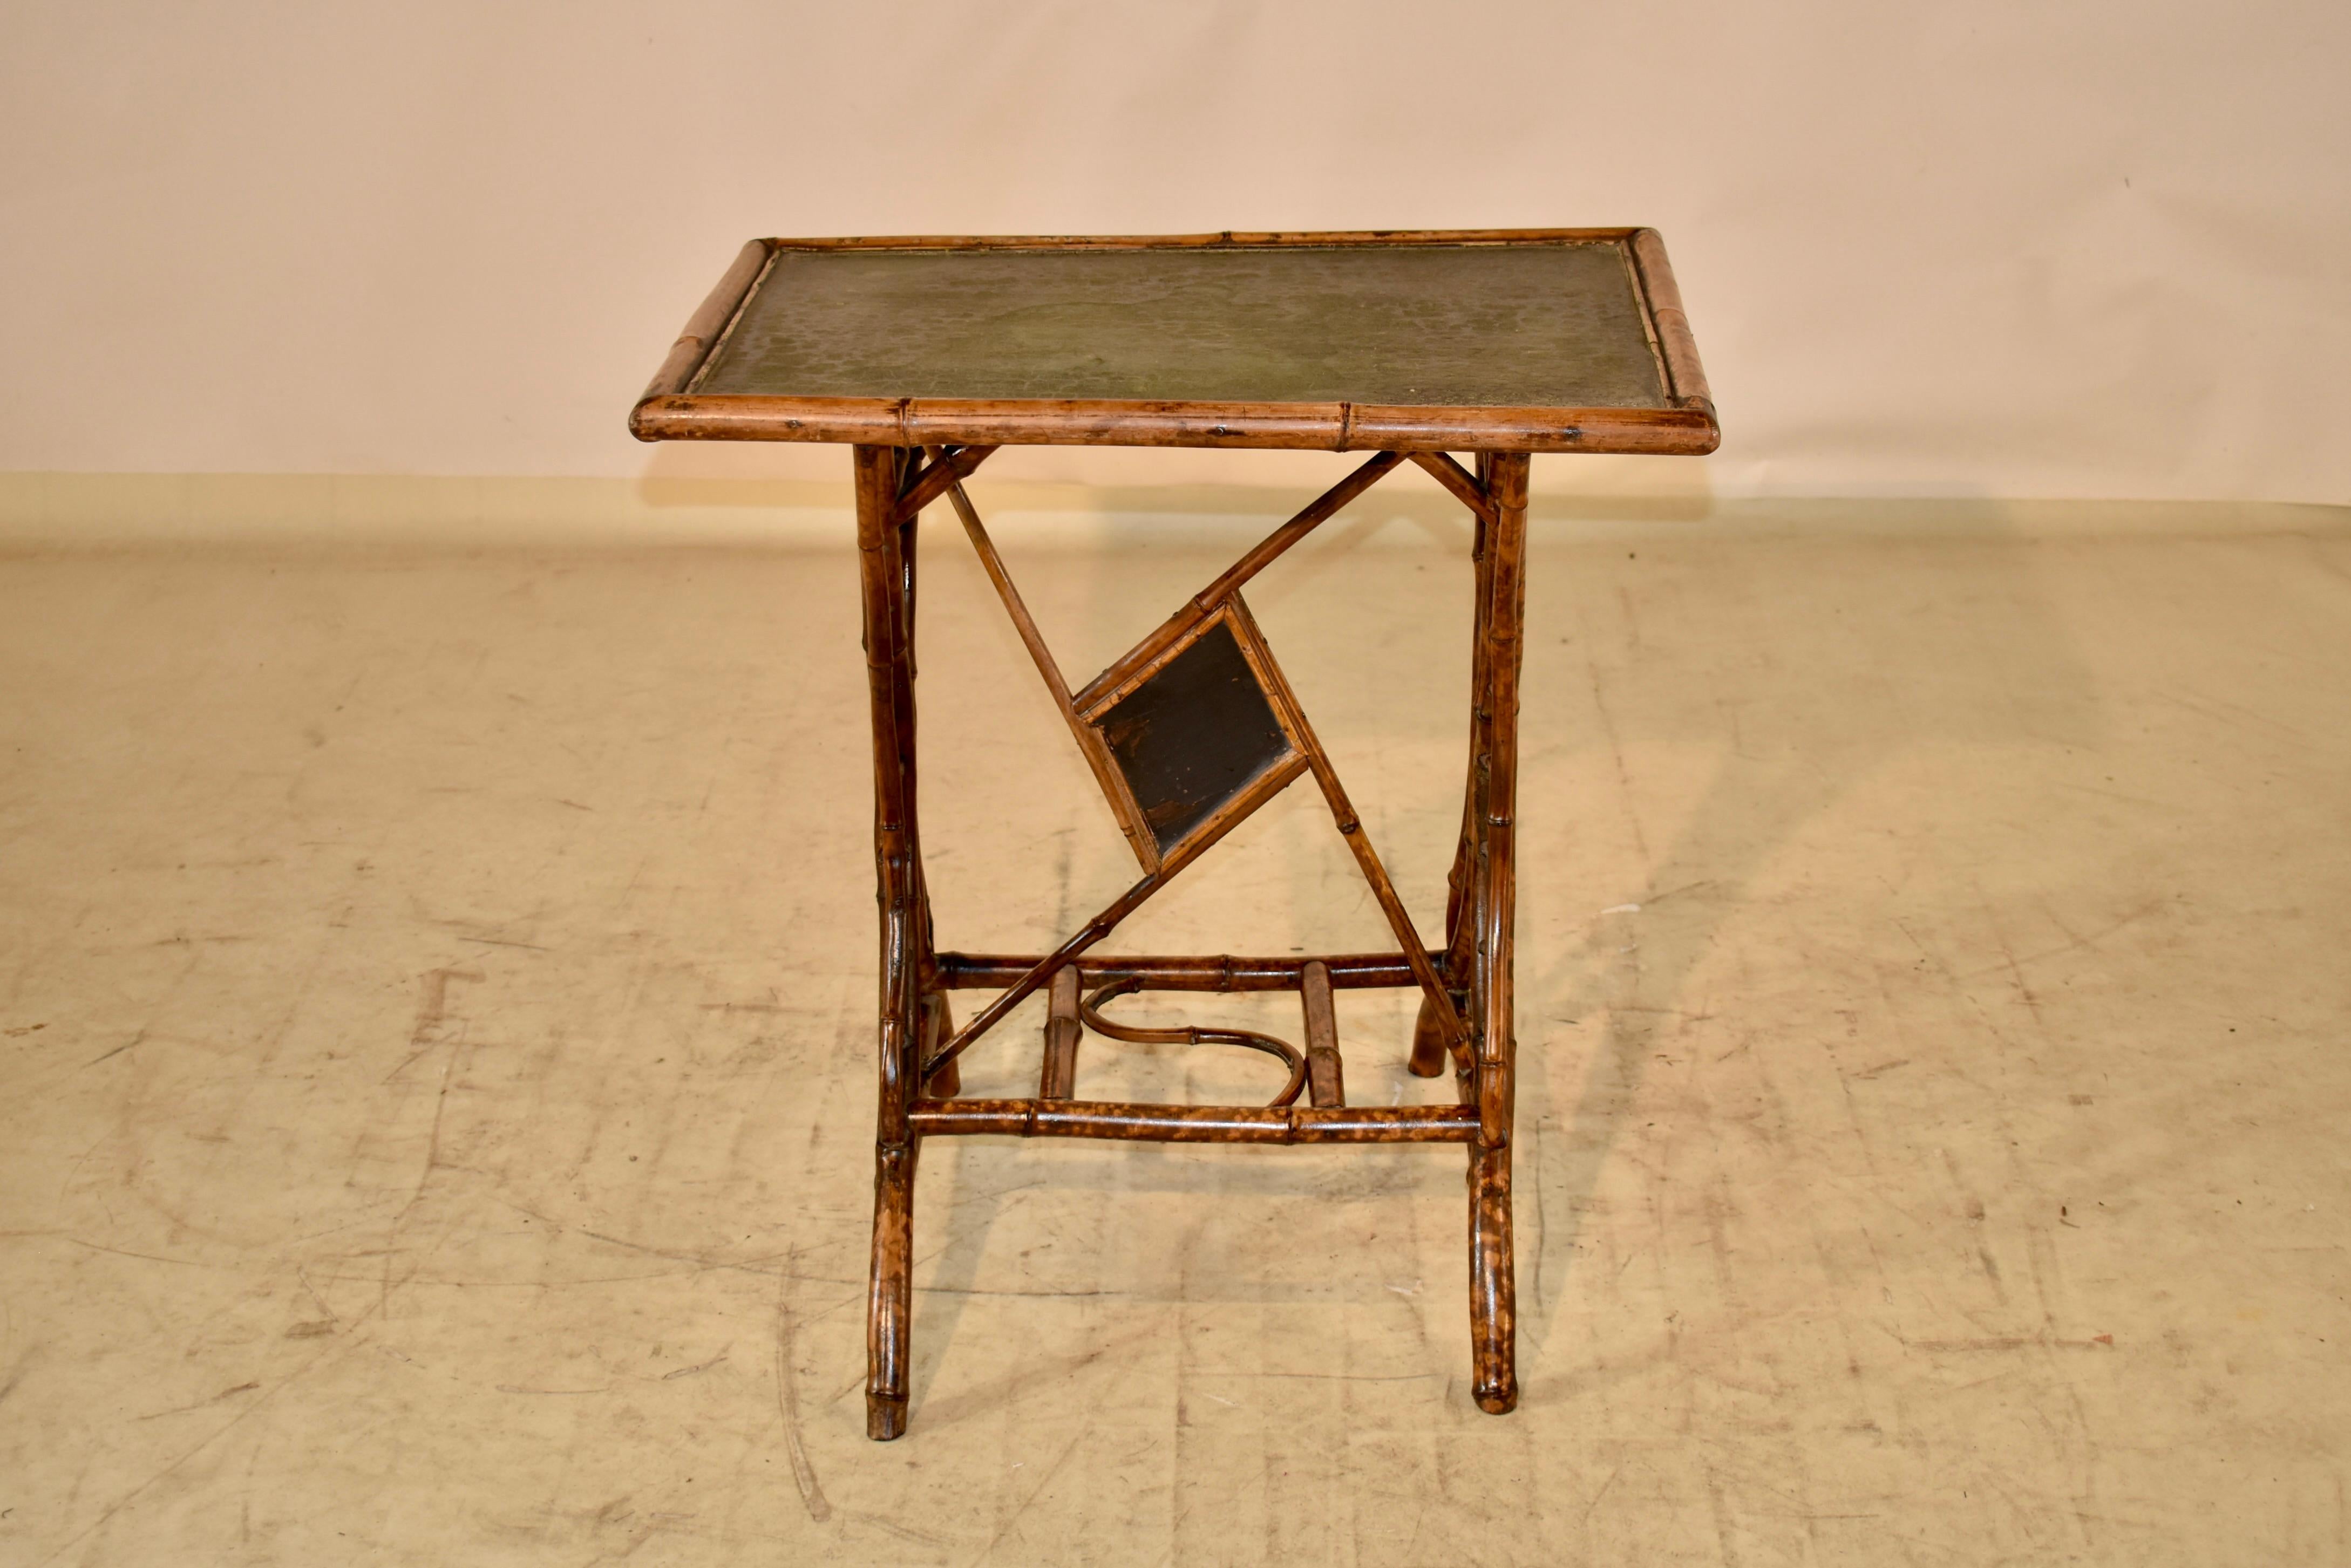 19th century bamboo side table with fantastic original details. The top is in the original green color, which has alligatored to a beautiful patina which was worth saving. The base is made from shaped bamboo to form interesting legs in serpentined